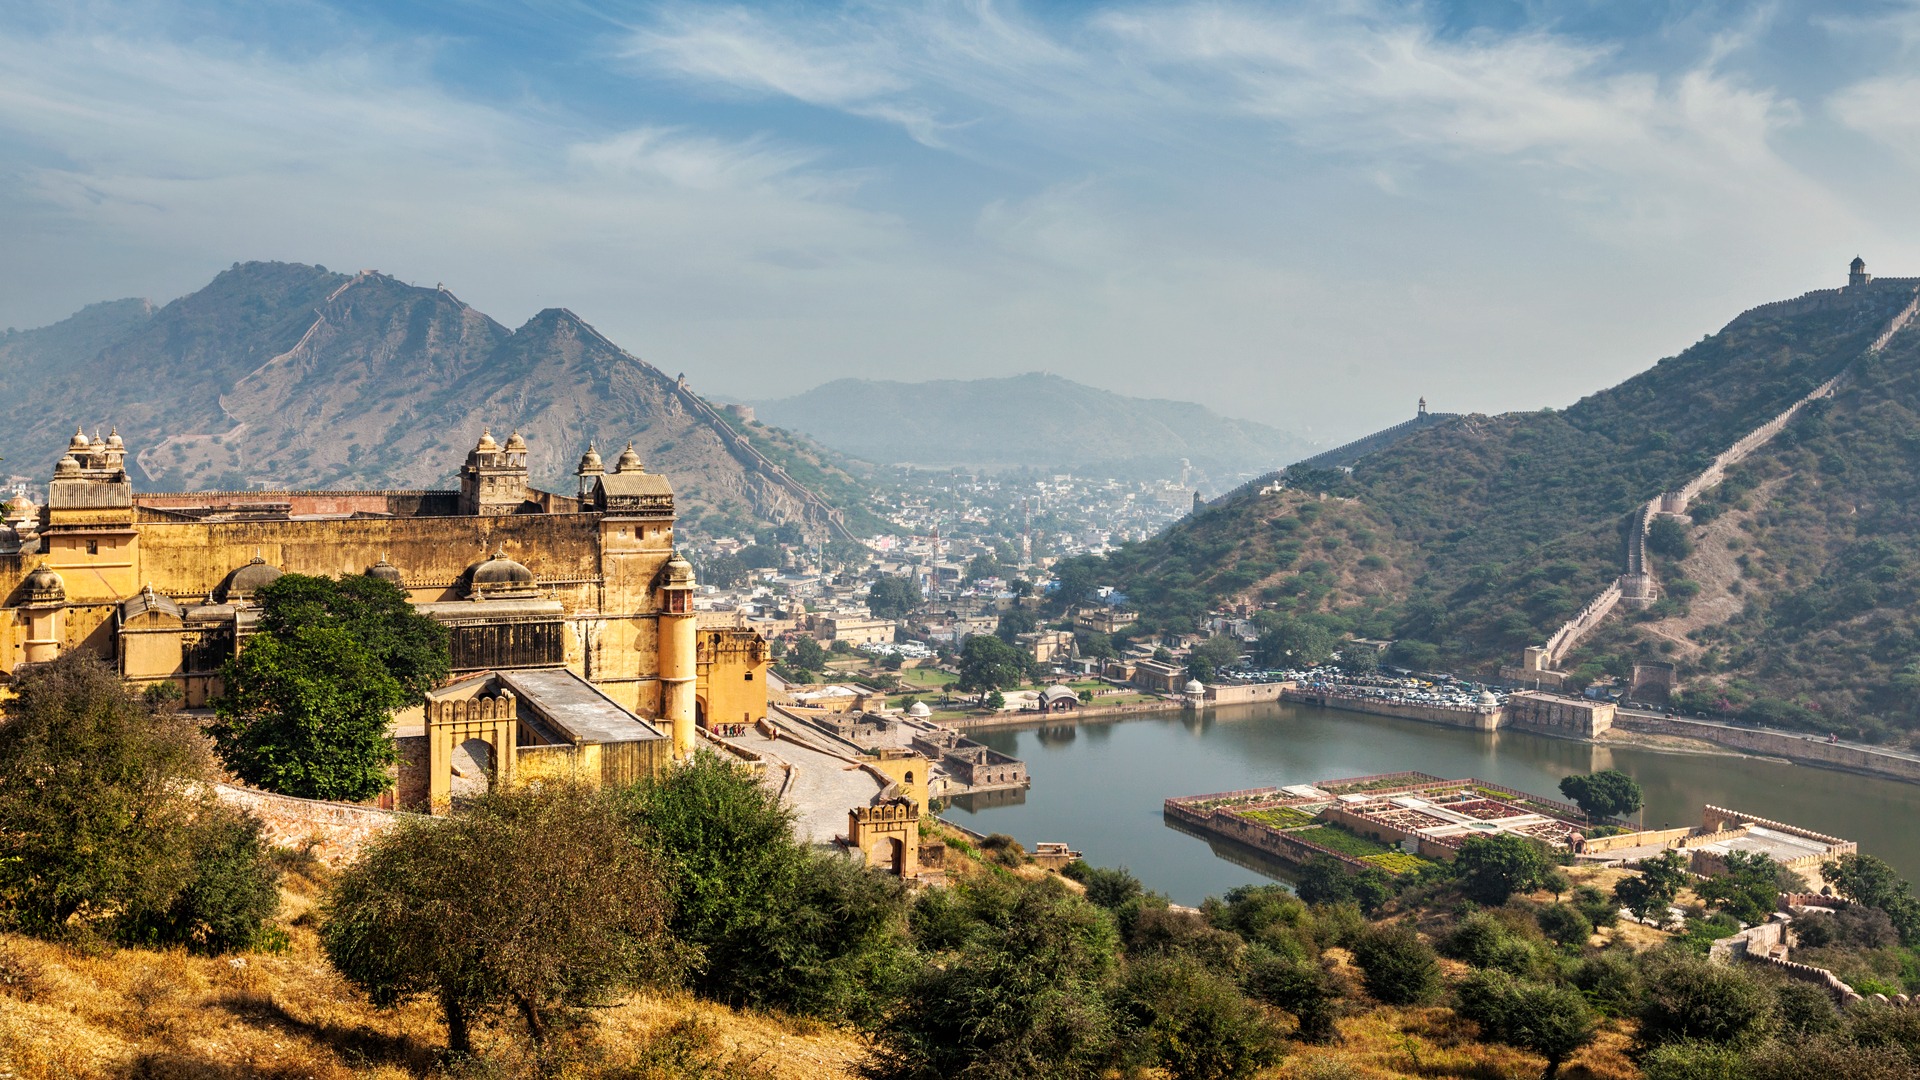 Jaipur: Magnificent architectures of forts and palaces